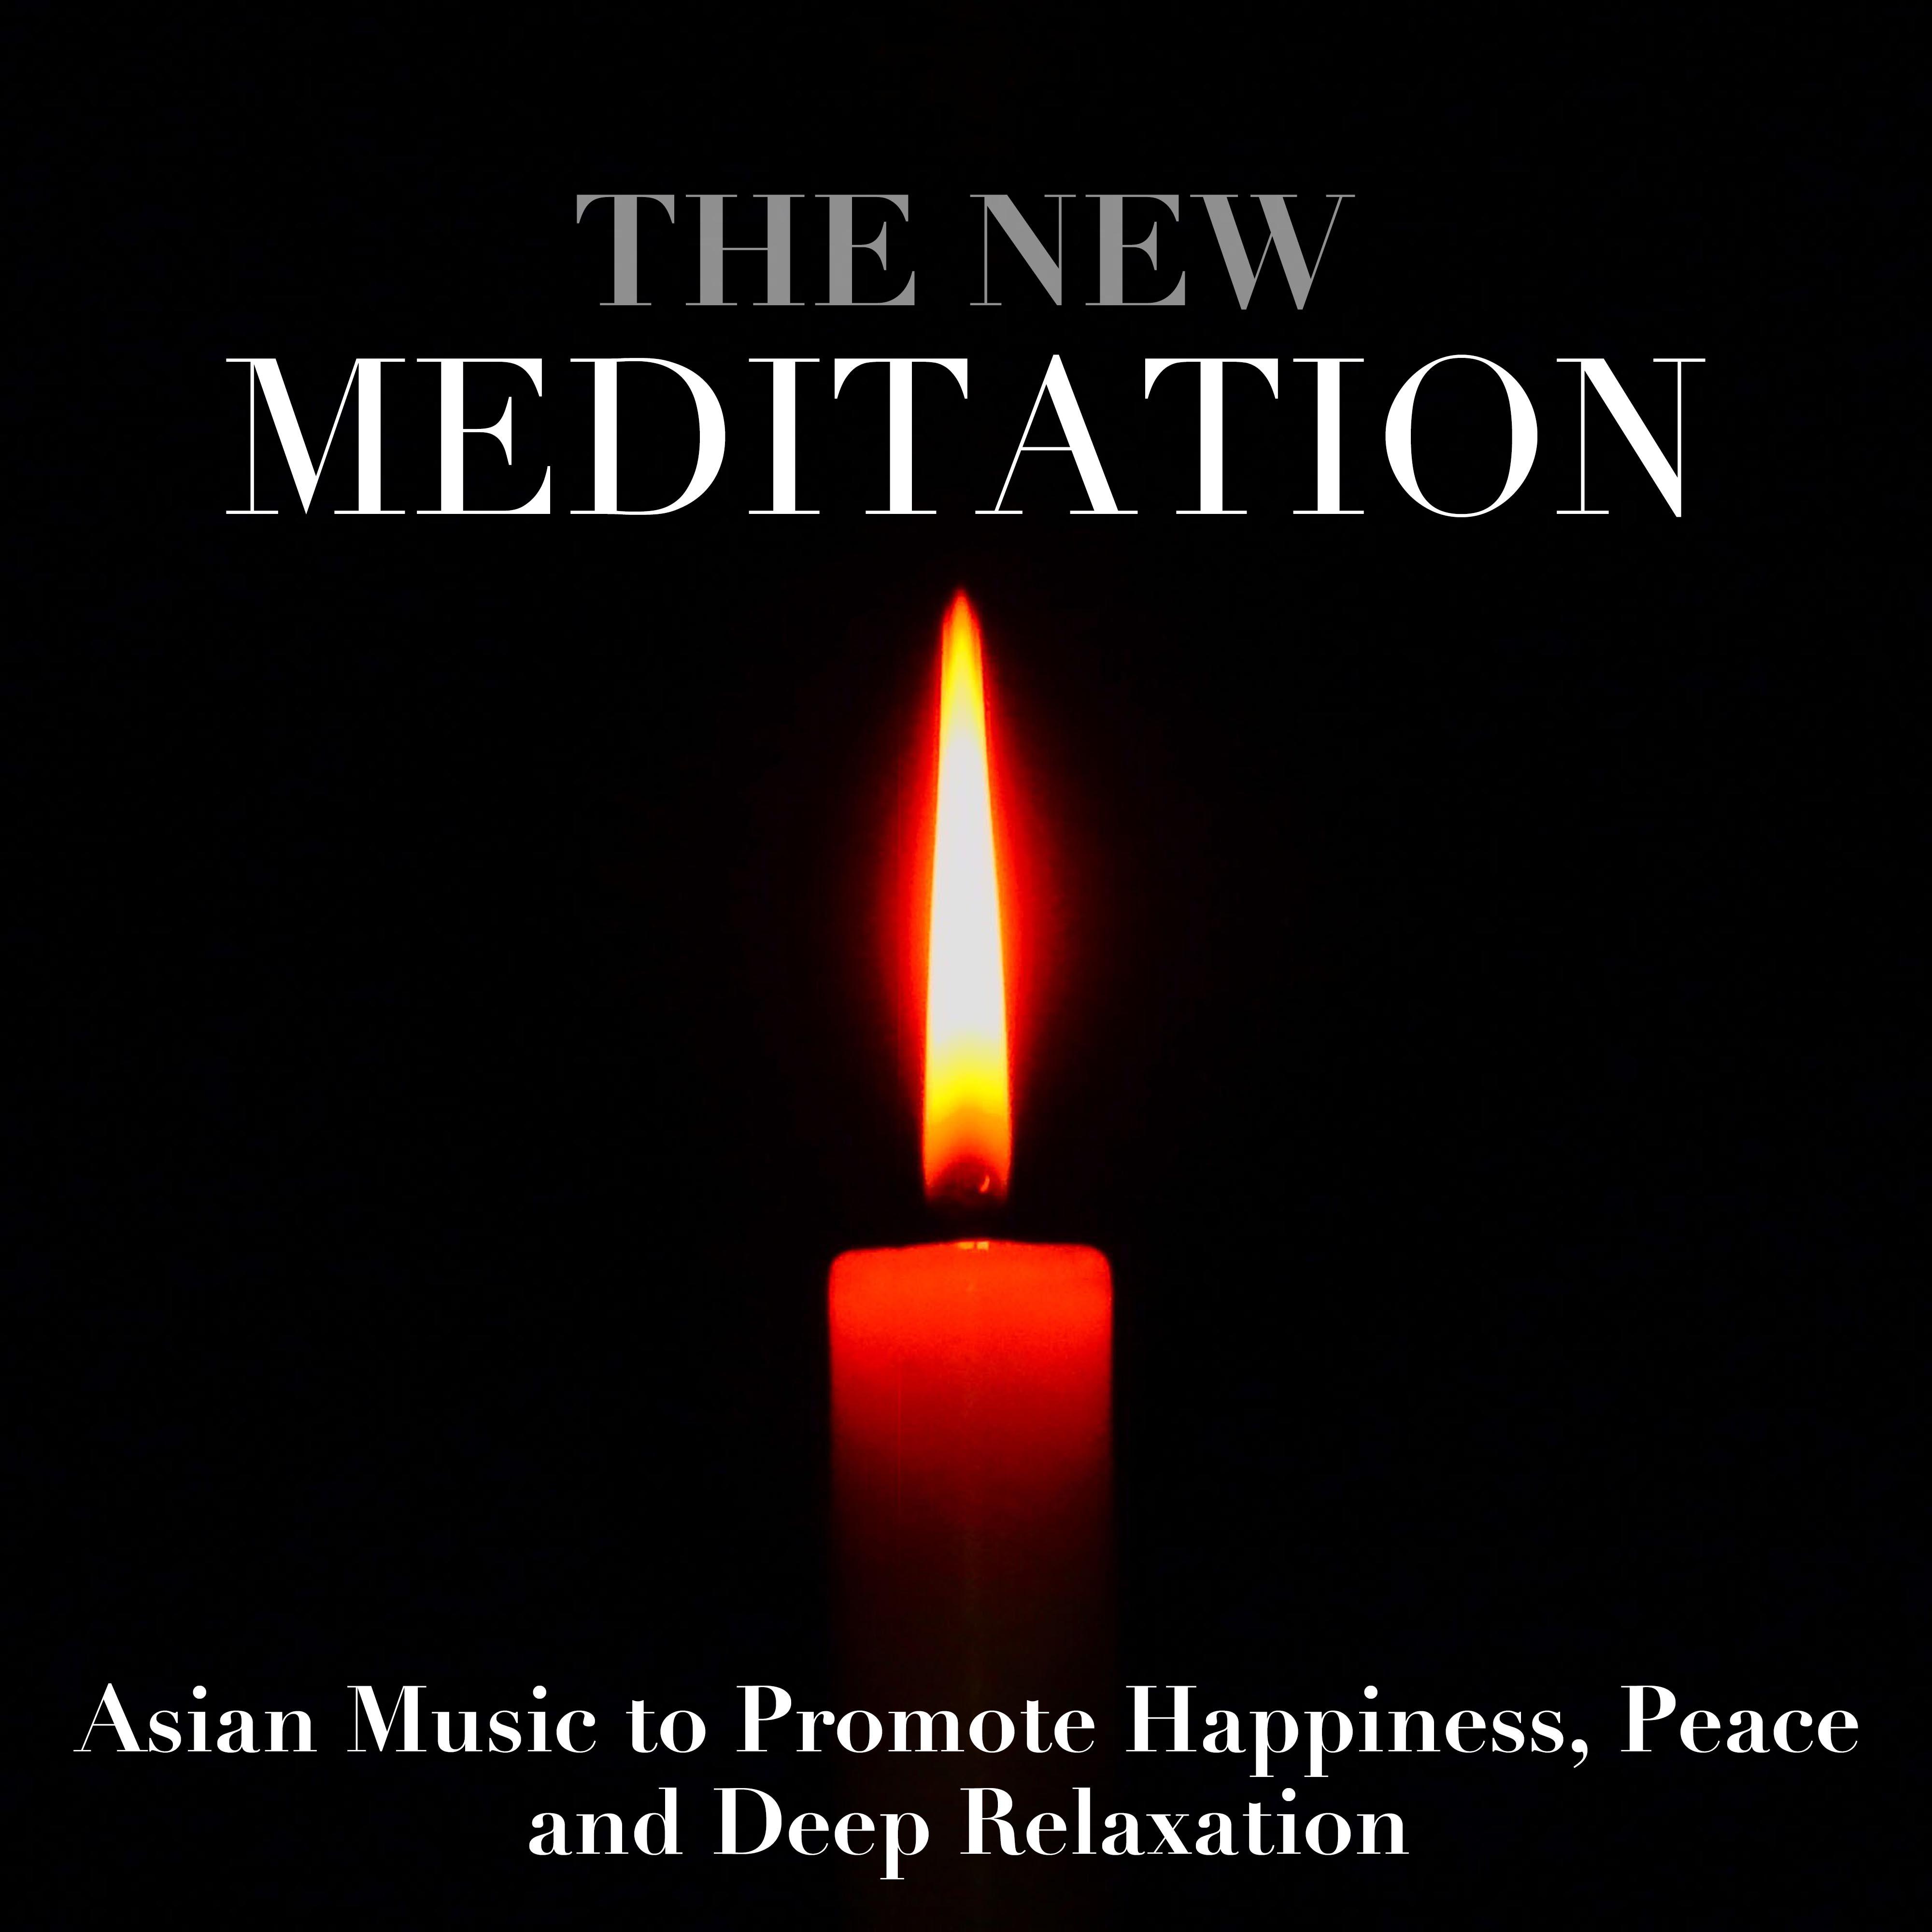 The New Meditation: Kick Start your Practice with this Wonderful Instrumental Asian Music to Promote Happiness, Peace, Calm and Deep Relaxation